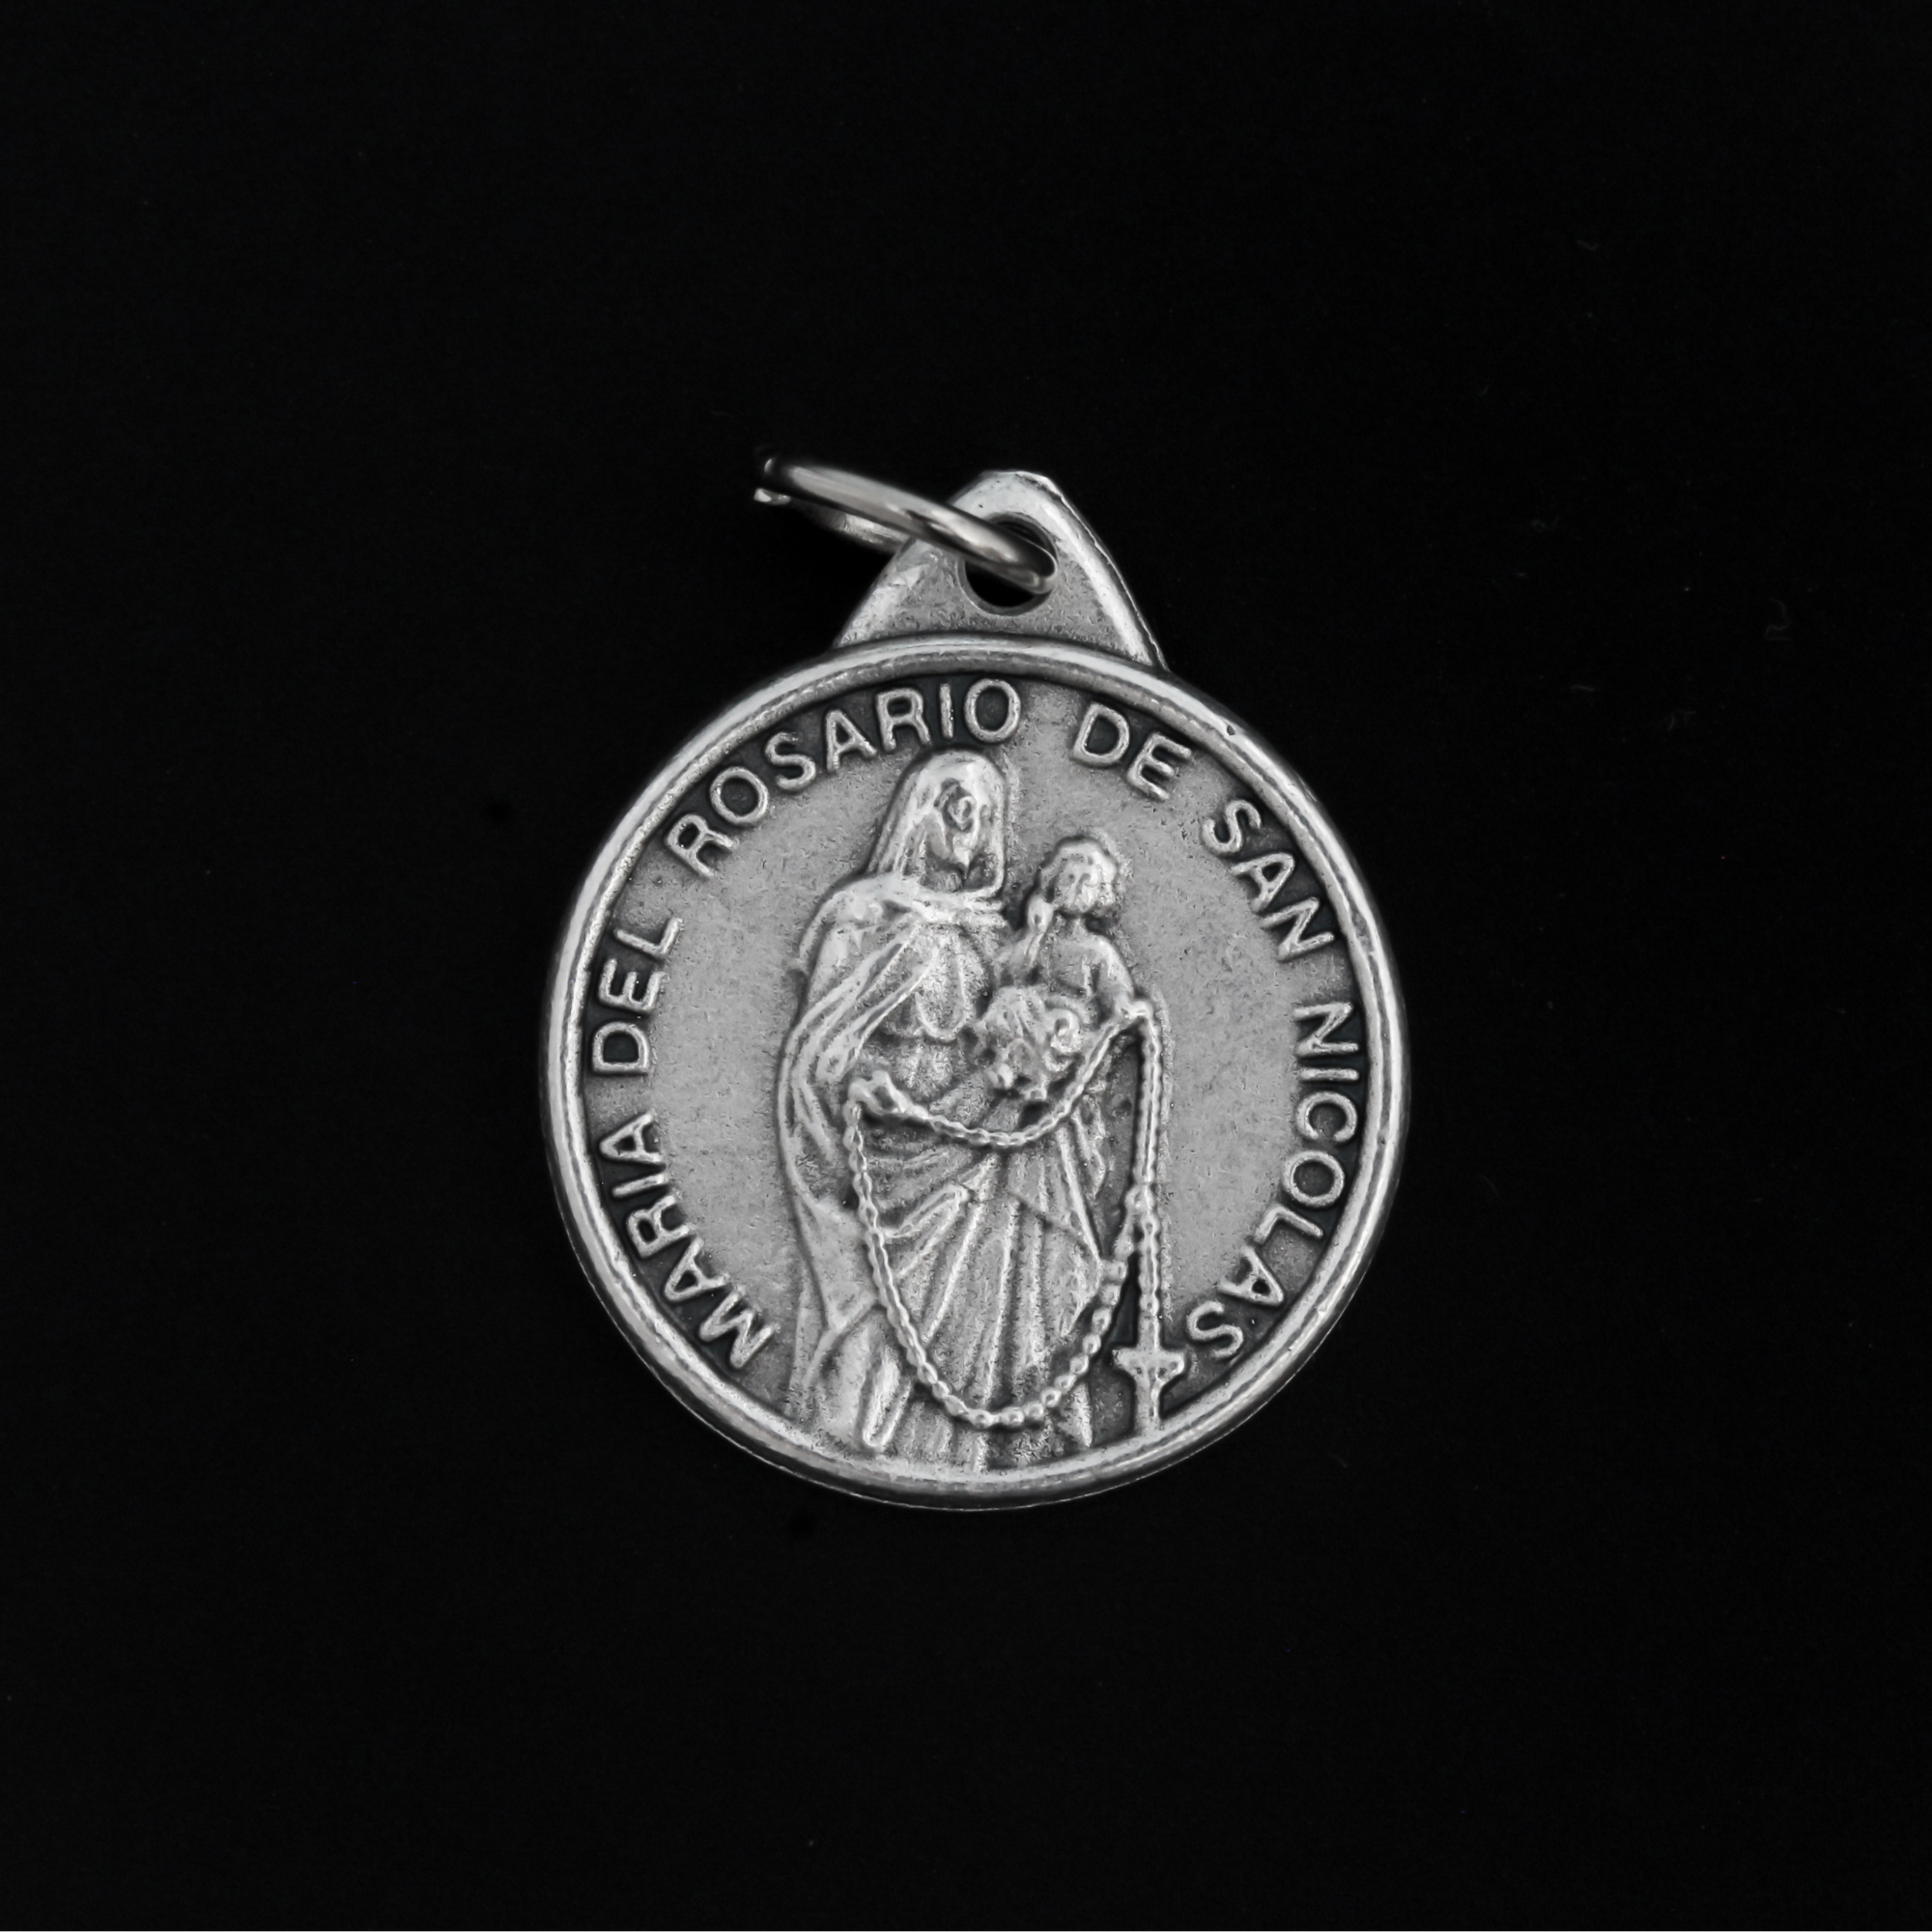 The front of the medal features an embossed image from the reported apparitions of Maria del Rosario de San Nicolas, Argentina.